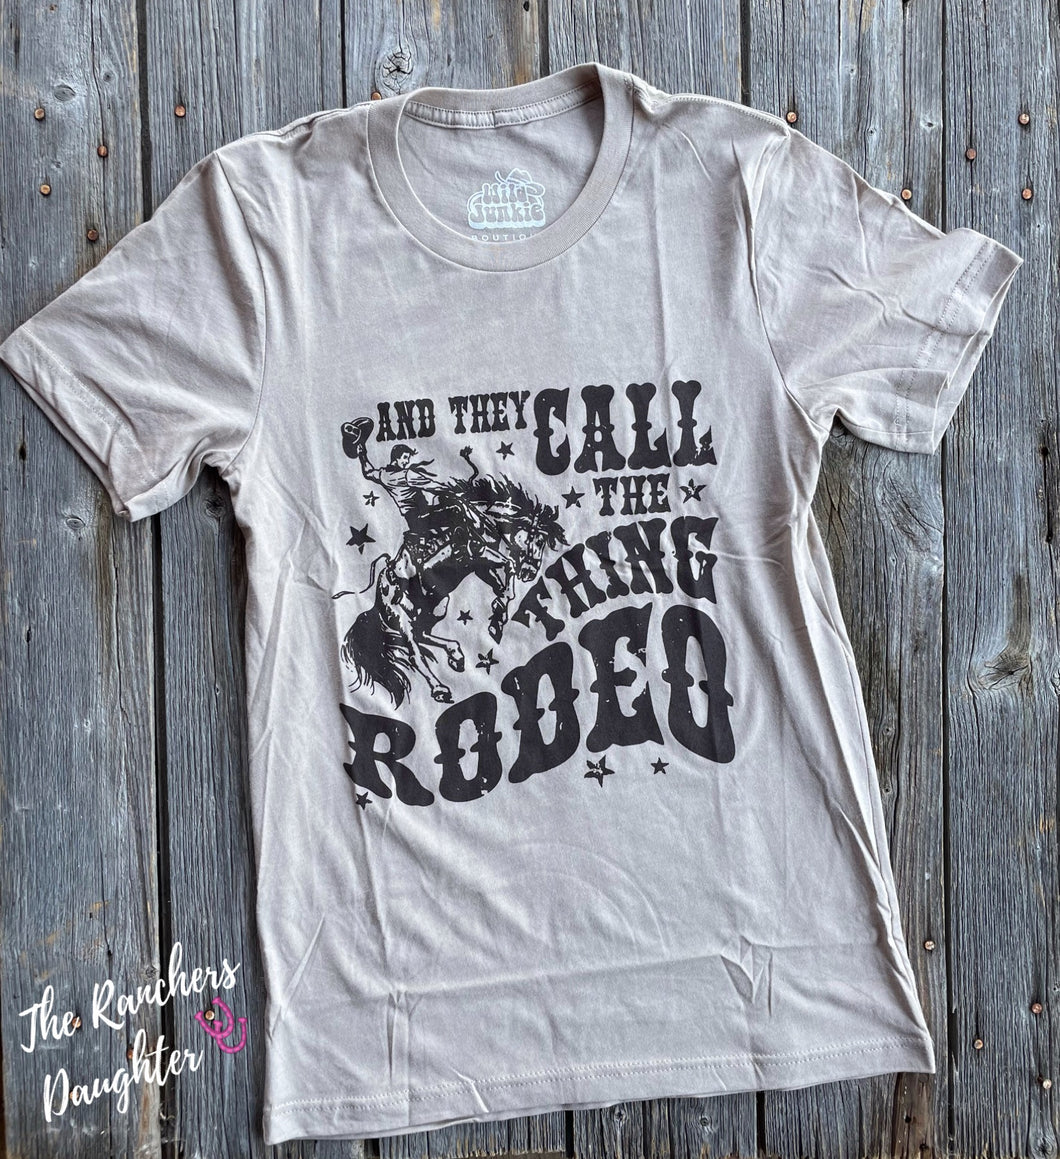 Call It Rodeo Tee